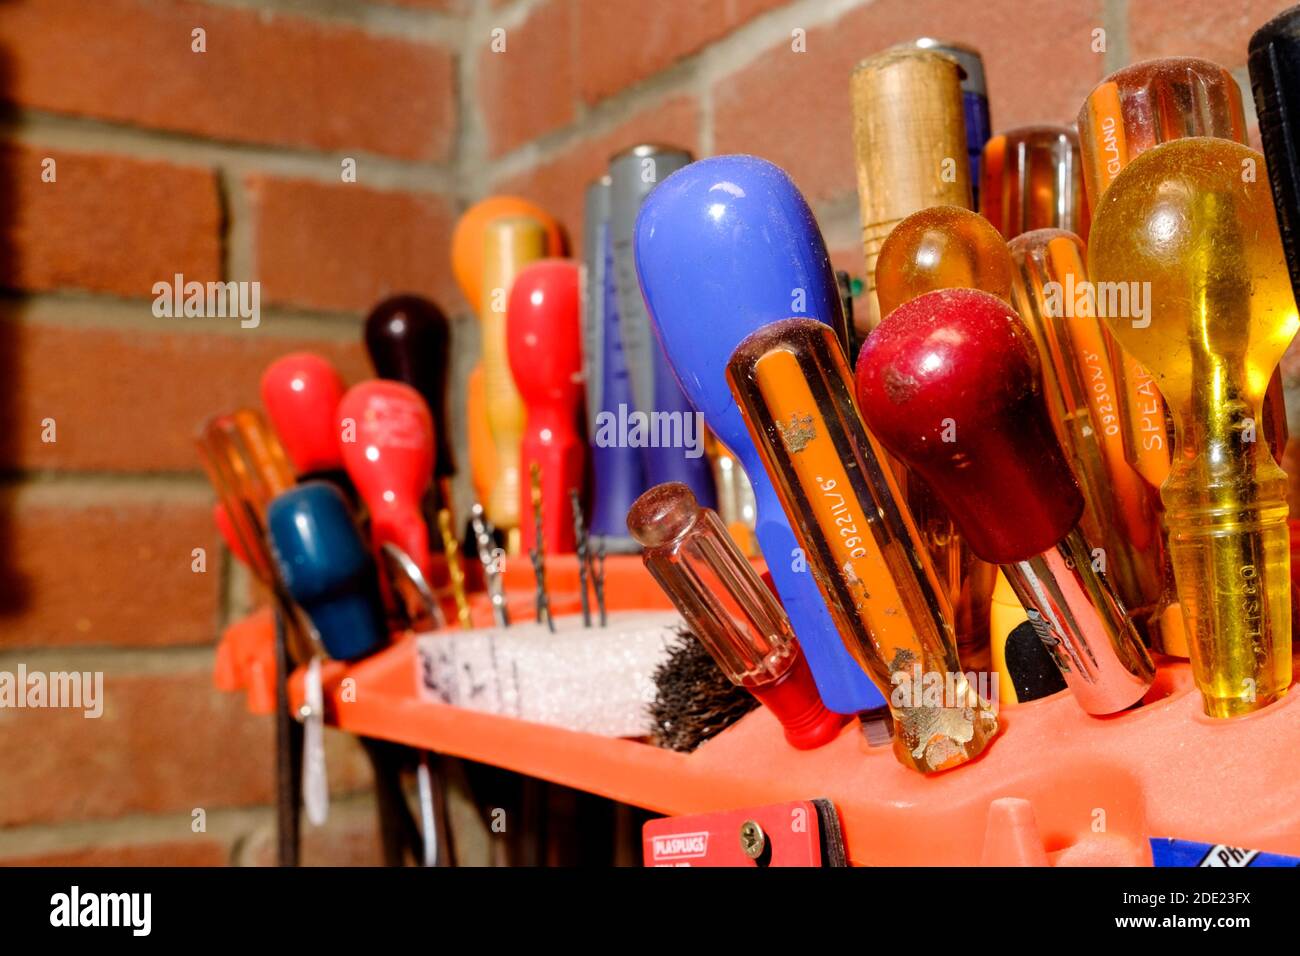 A tool shelf with a selection of DIY hand tools. Stock Photo